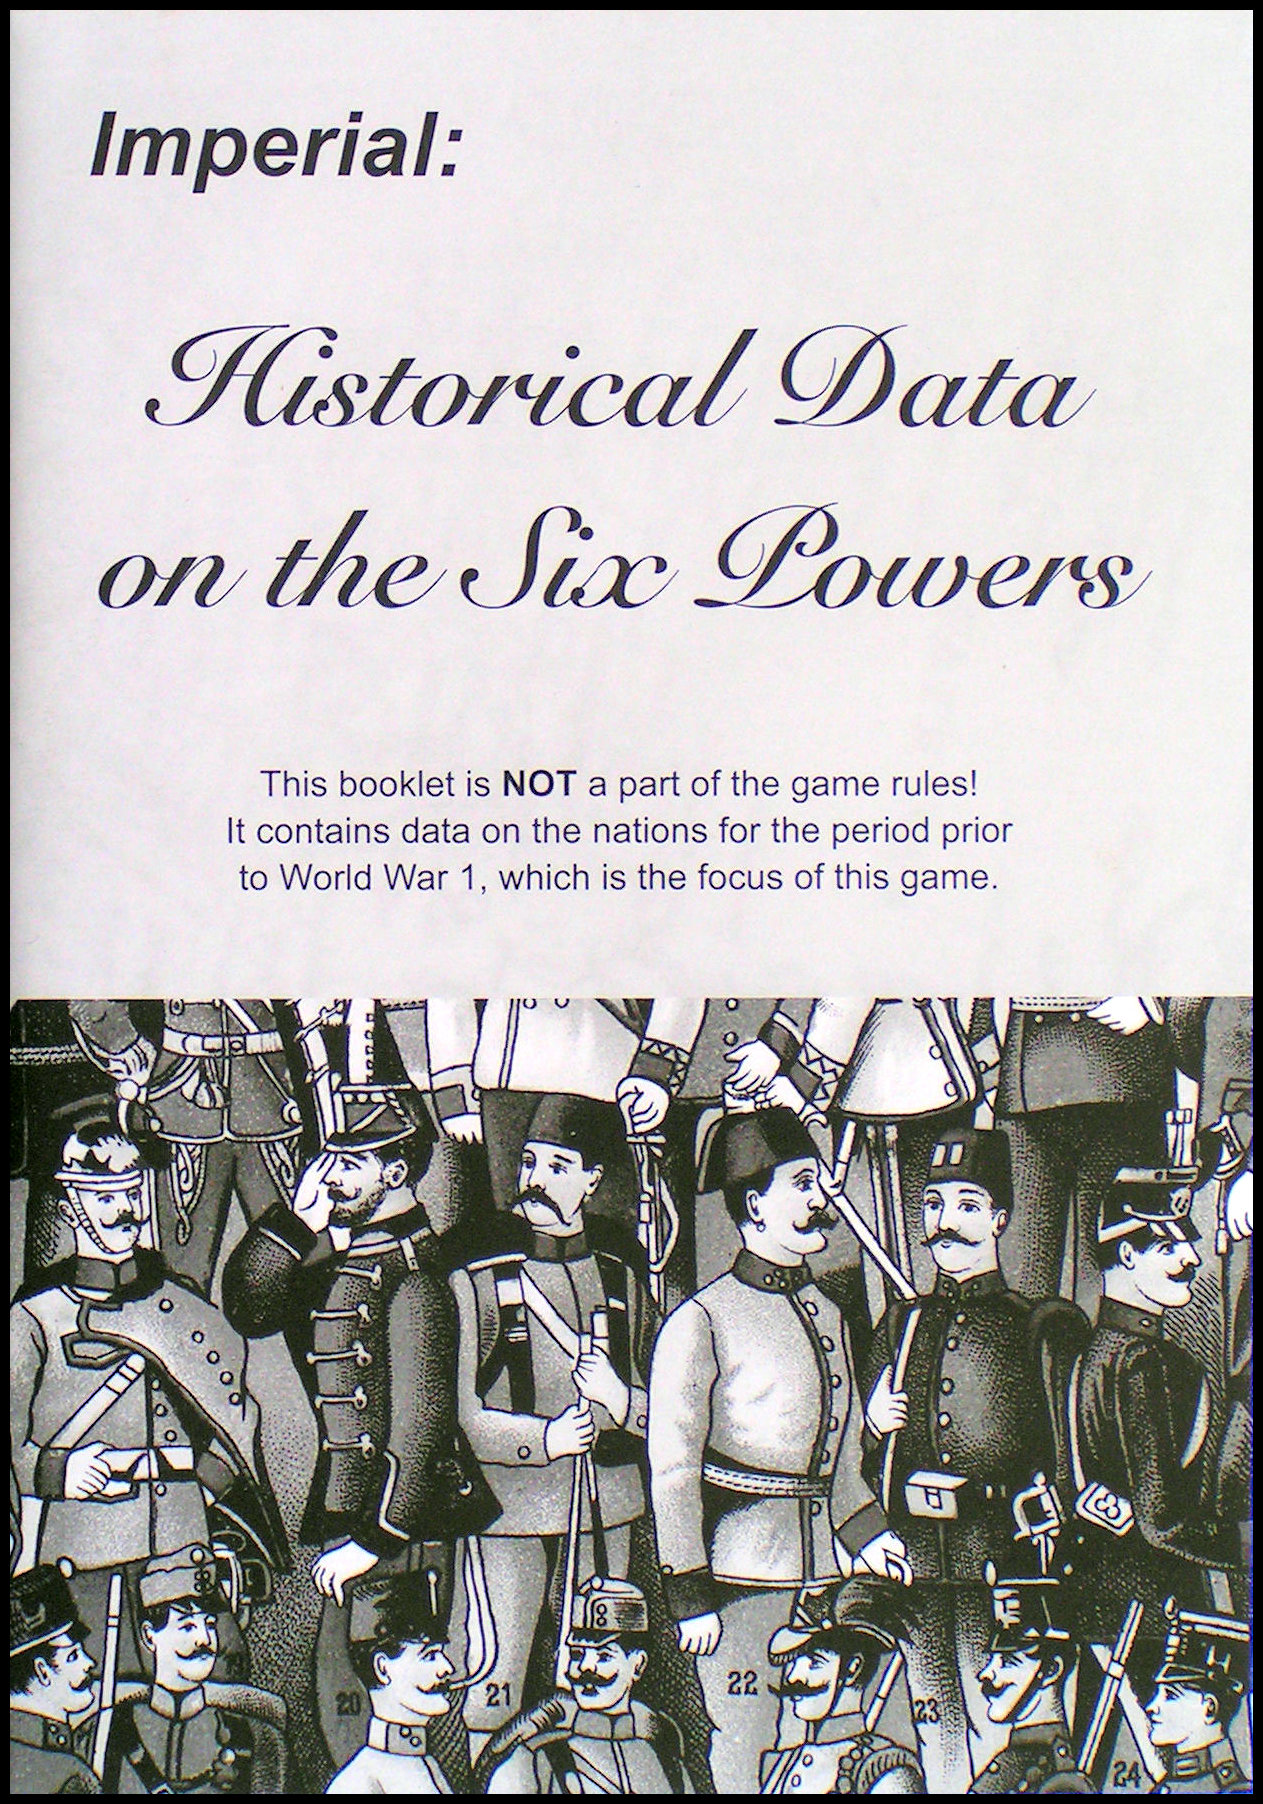 Imperial - Historical Data